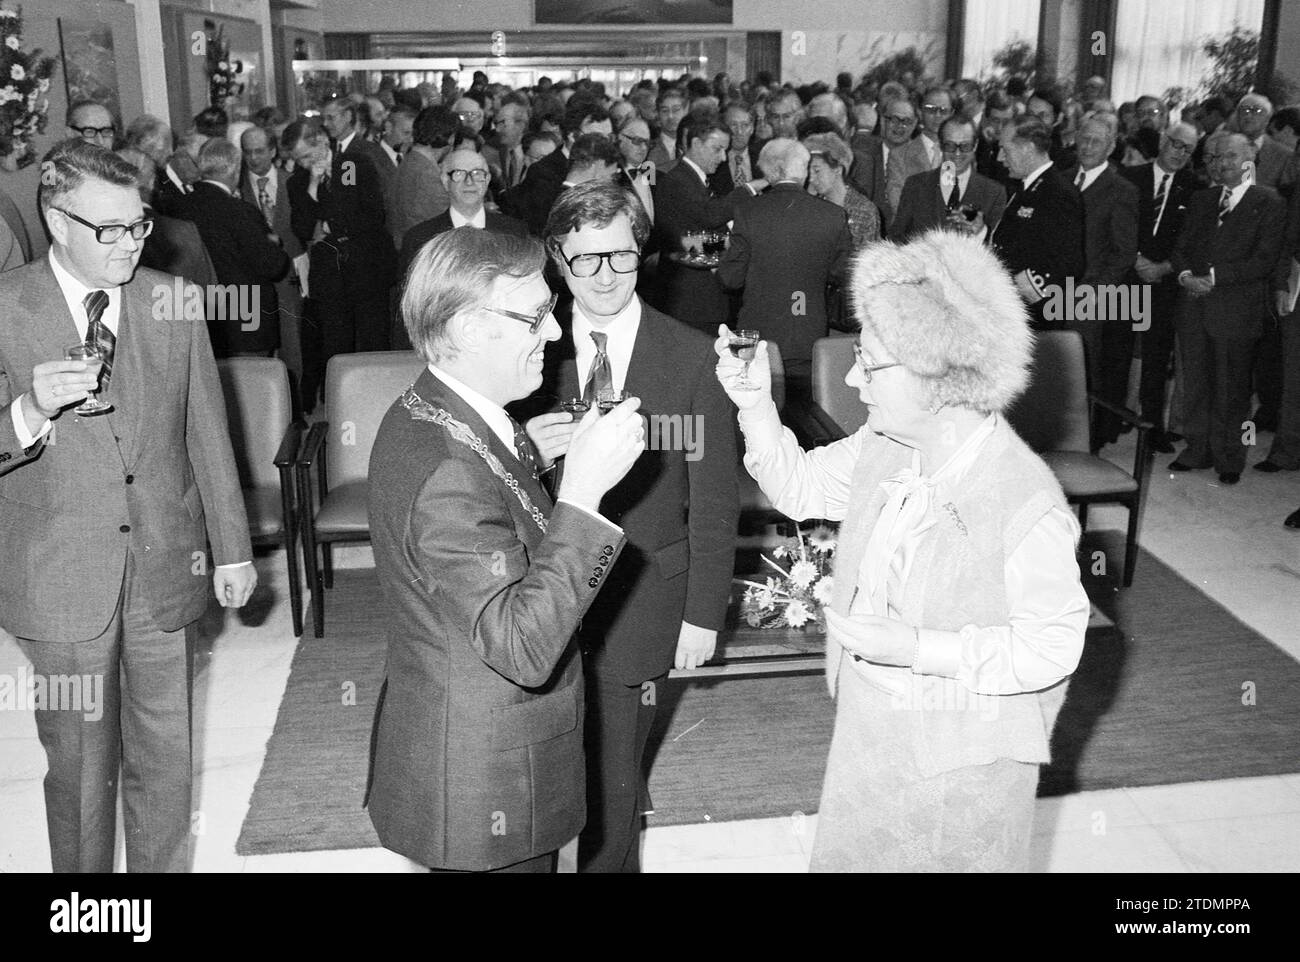 H.M.'s arrival in IJm. North Sea Canal 100 years, reception at town hall, offering book, Royal receptions and Royal visits, 01-11-1976, Whizgle News from the Past, Tailored for the Future. Explore historical narratives, Dutch The Netherlands agency image with a modern perspective, bridging the gap between yesterday's events and tomorrow's insights. A timeless journey shaping the stories that shape our future Stock Photo